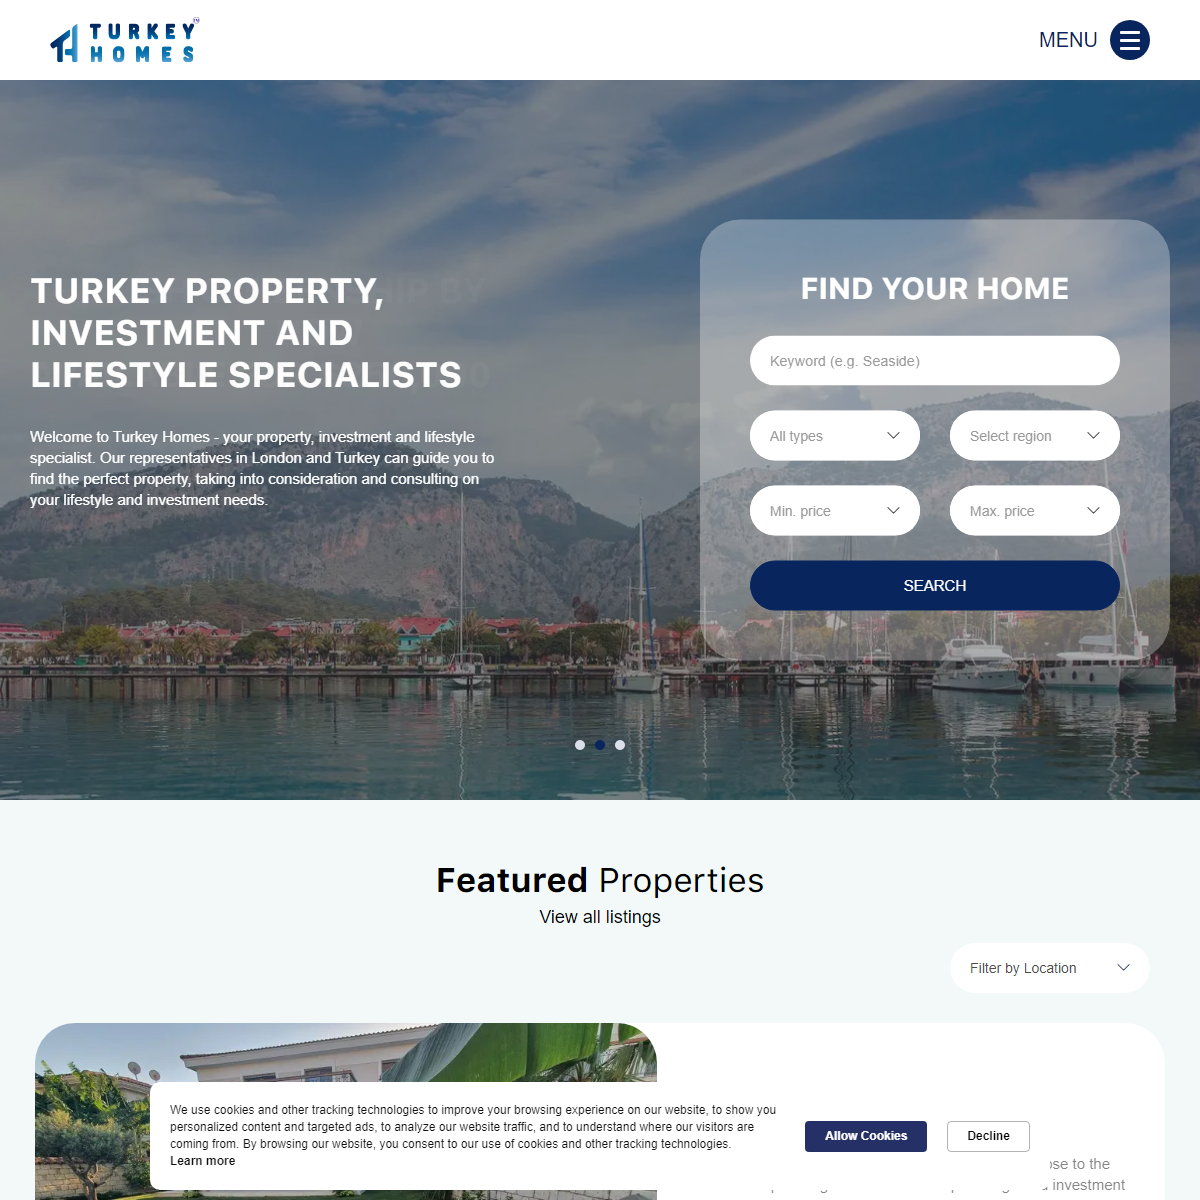 A complete backup of https://www.turkeyhomes.com/